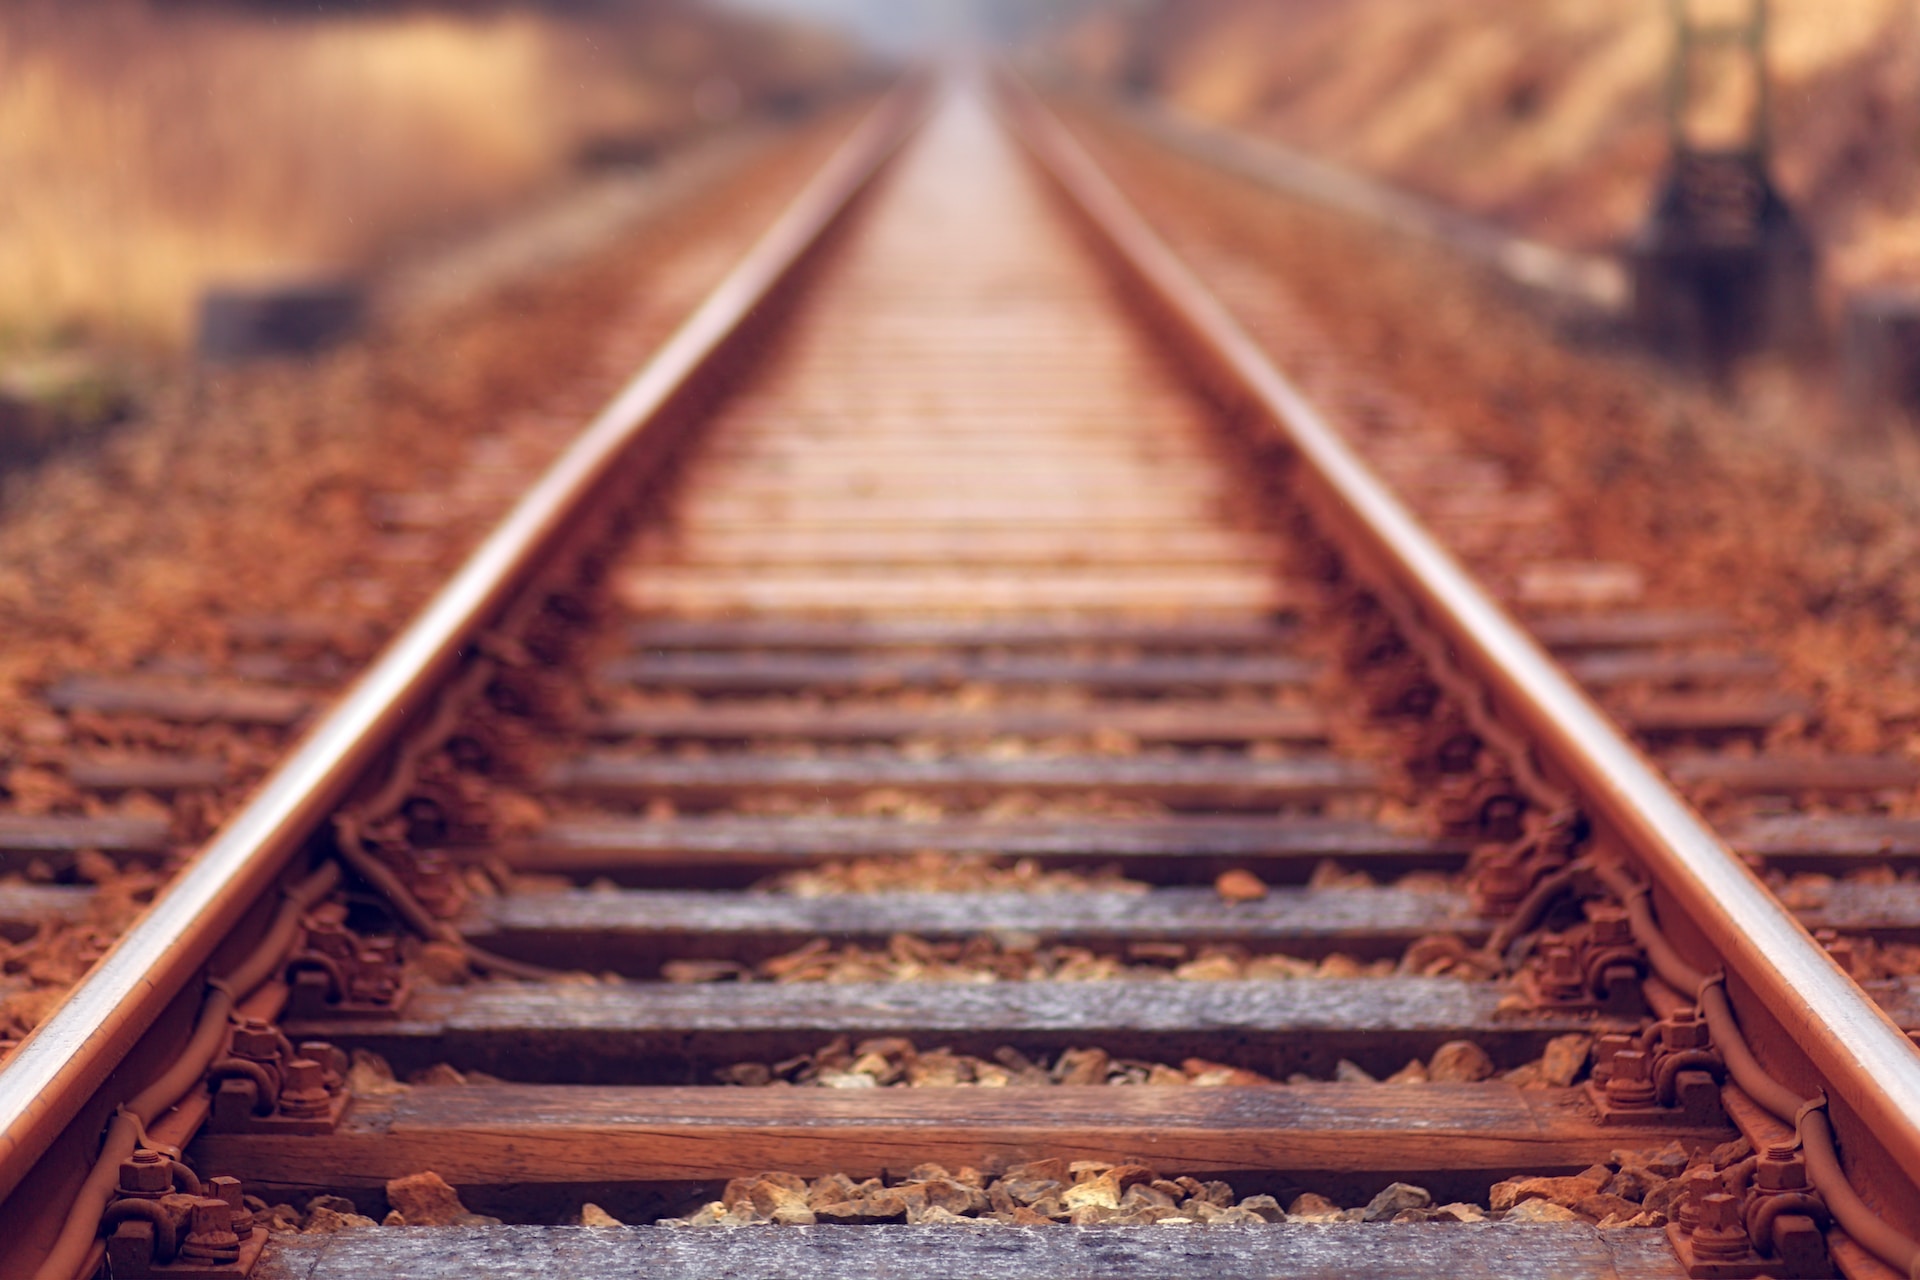 a set of railroad tracks focused on the nearest tracks to the viewer to show we should focus on the positive